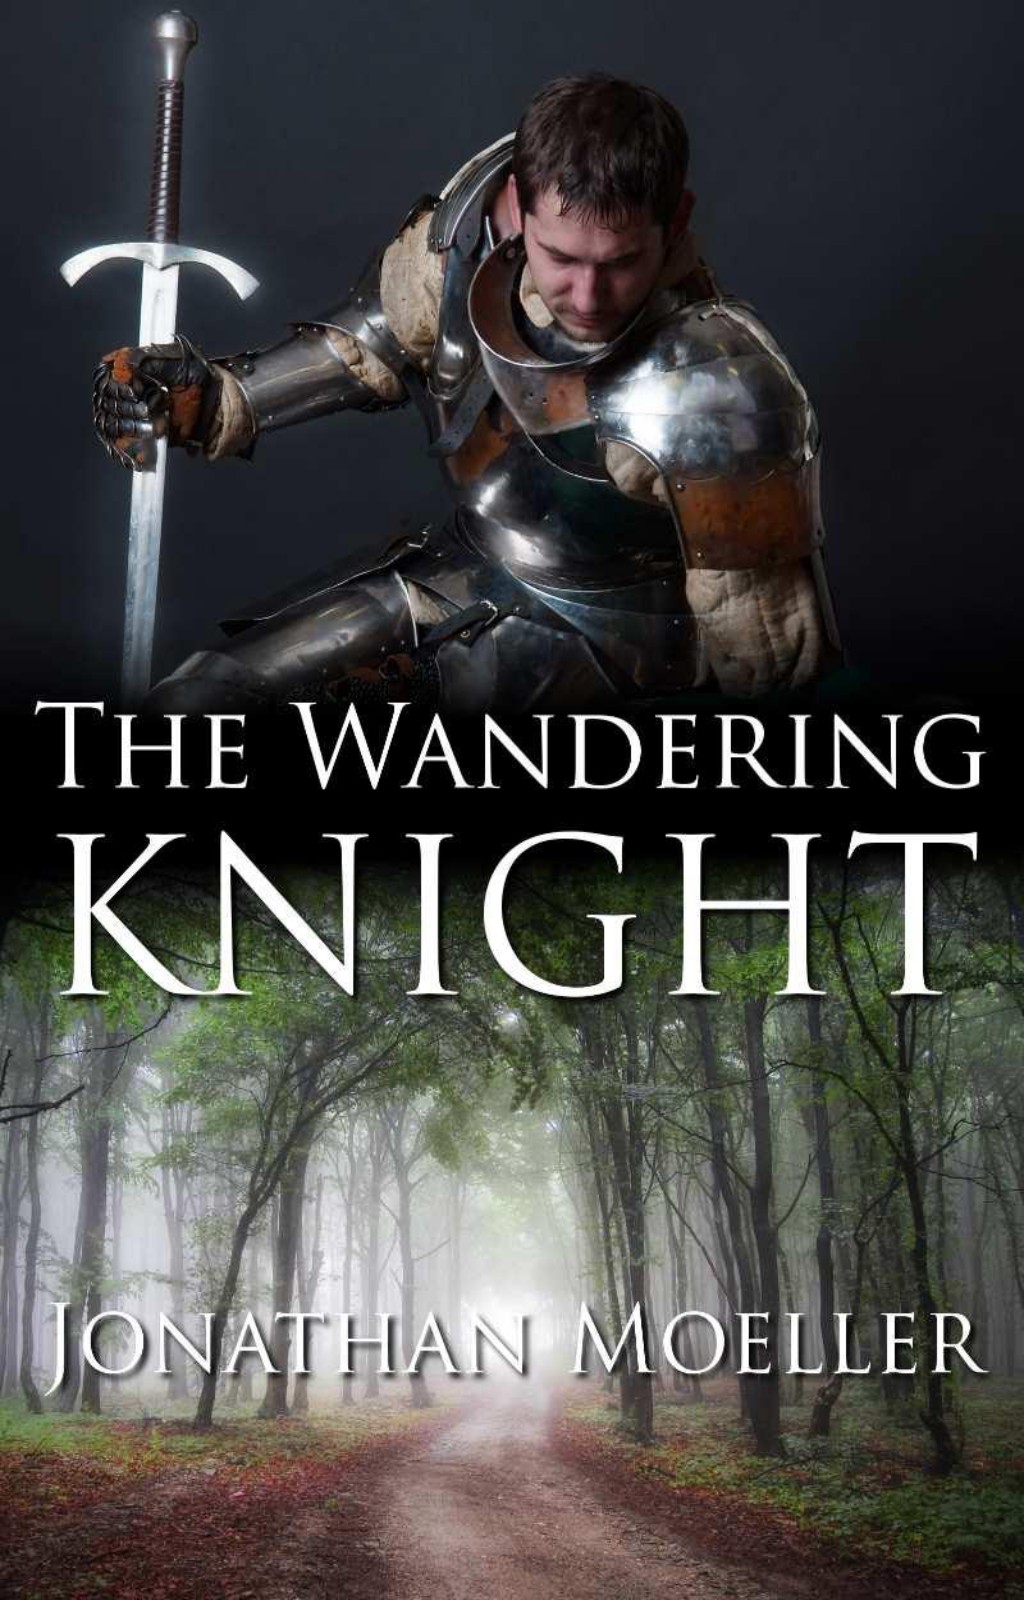 The Wandering Knight by Jonathan Moeller